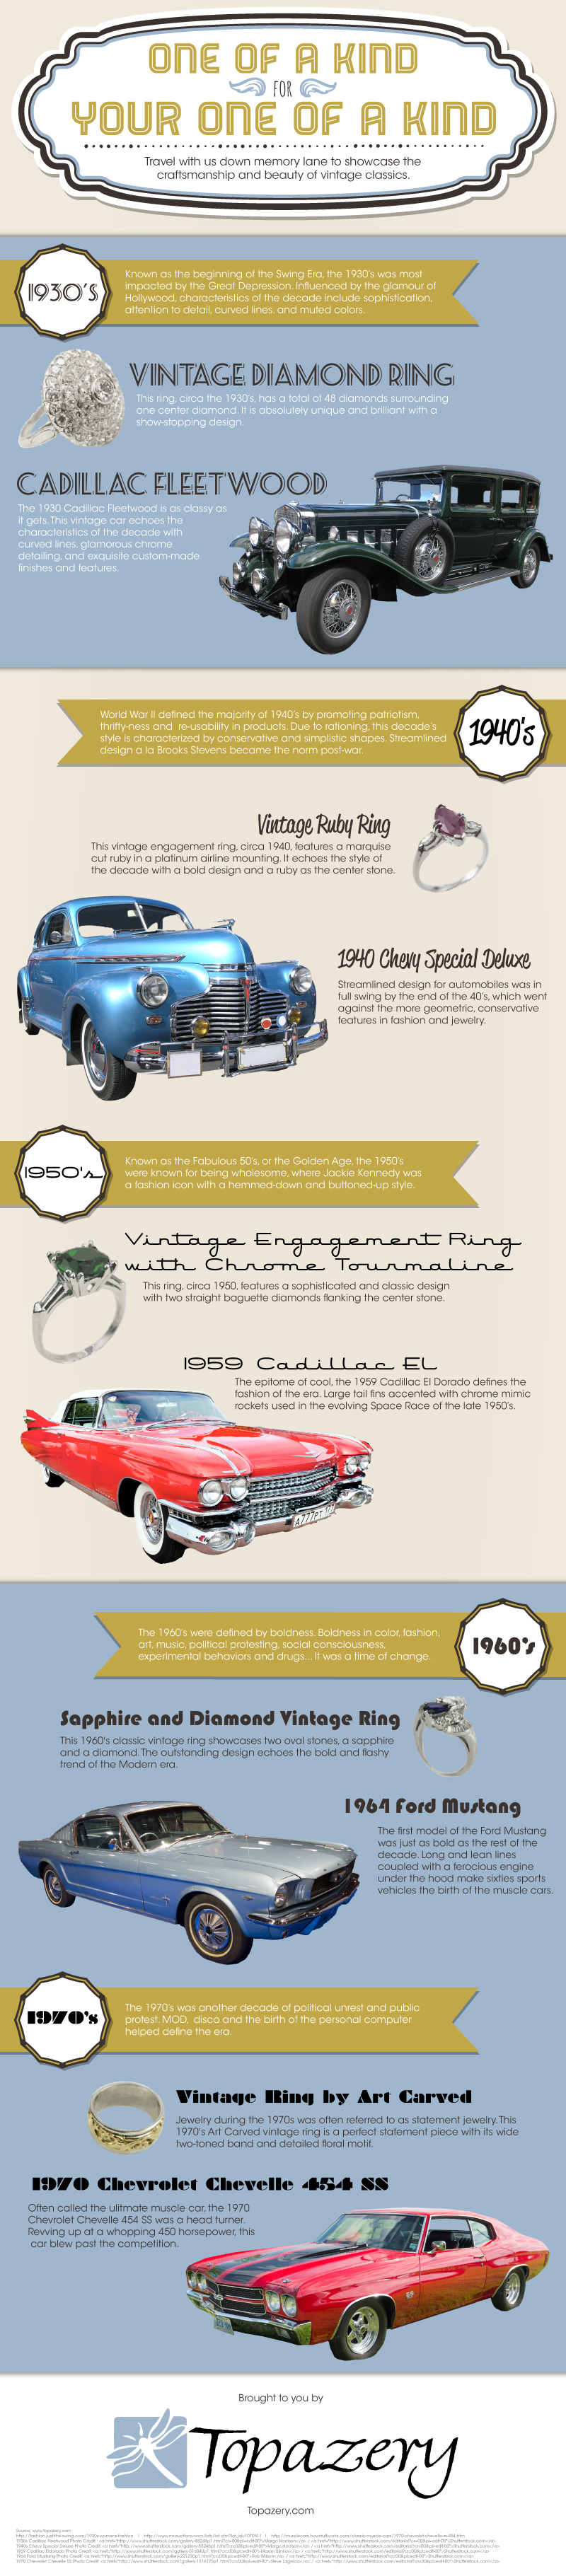 Vintage Engagement Rings and Vintage Cars